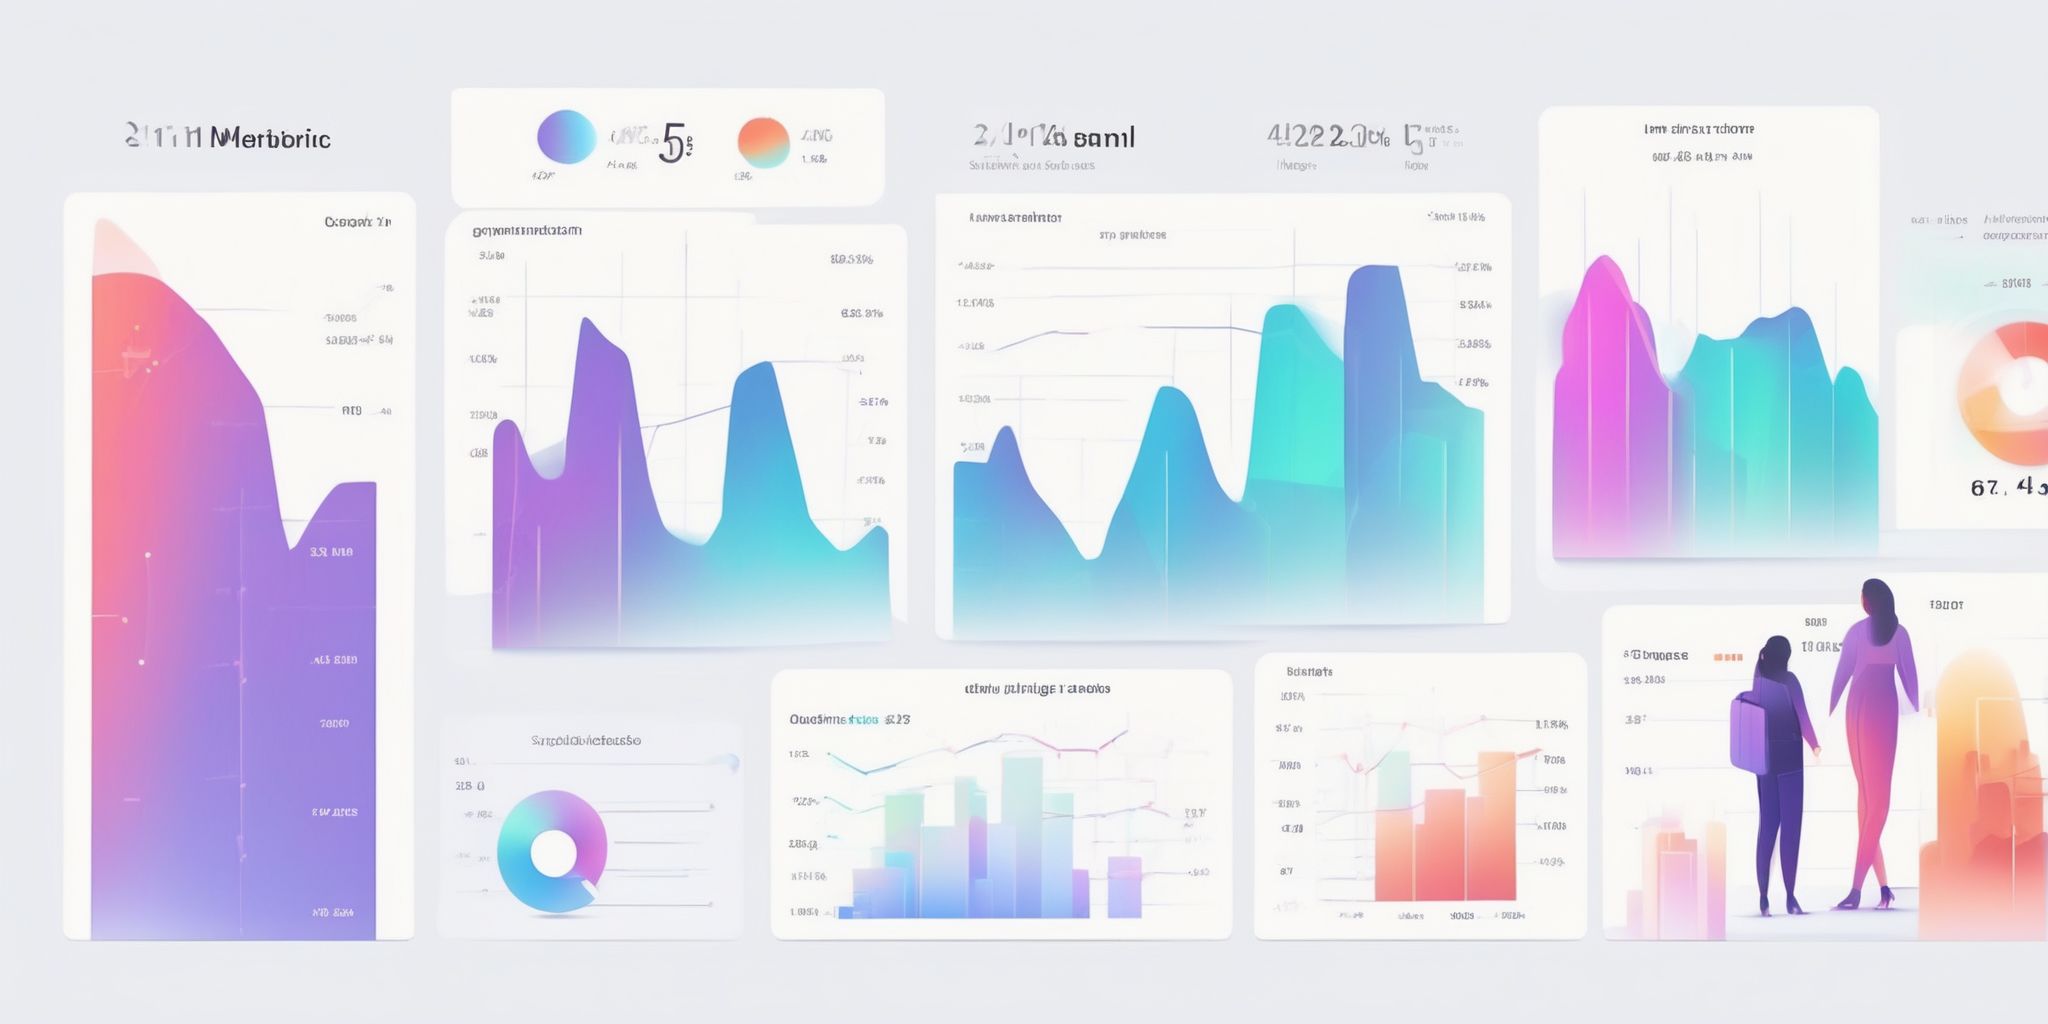 metrics in illustration style with gradients and white background